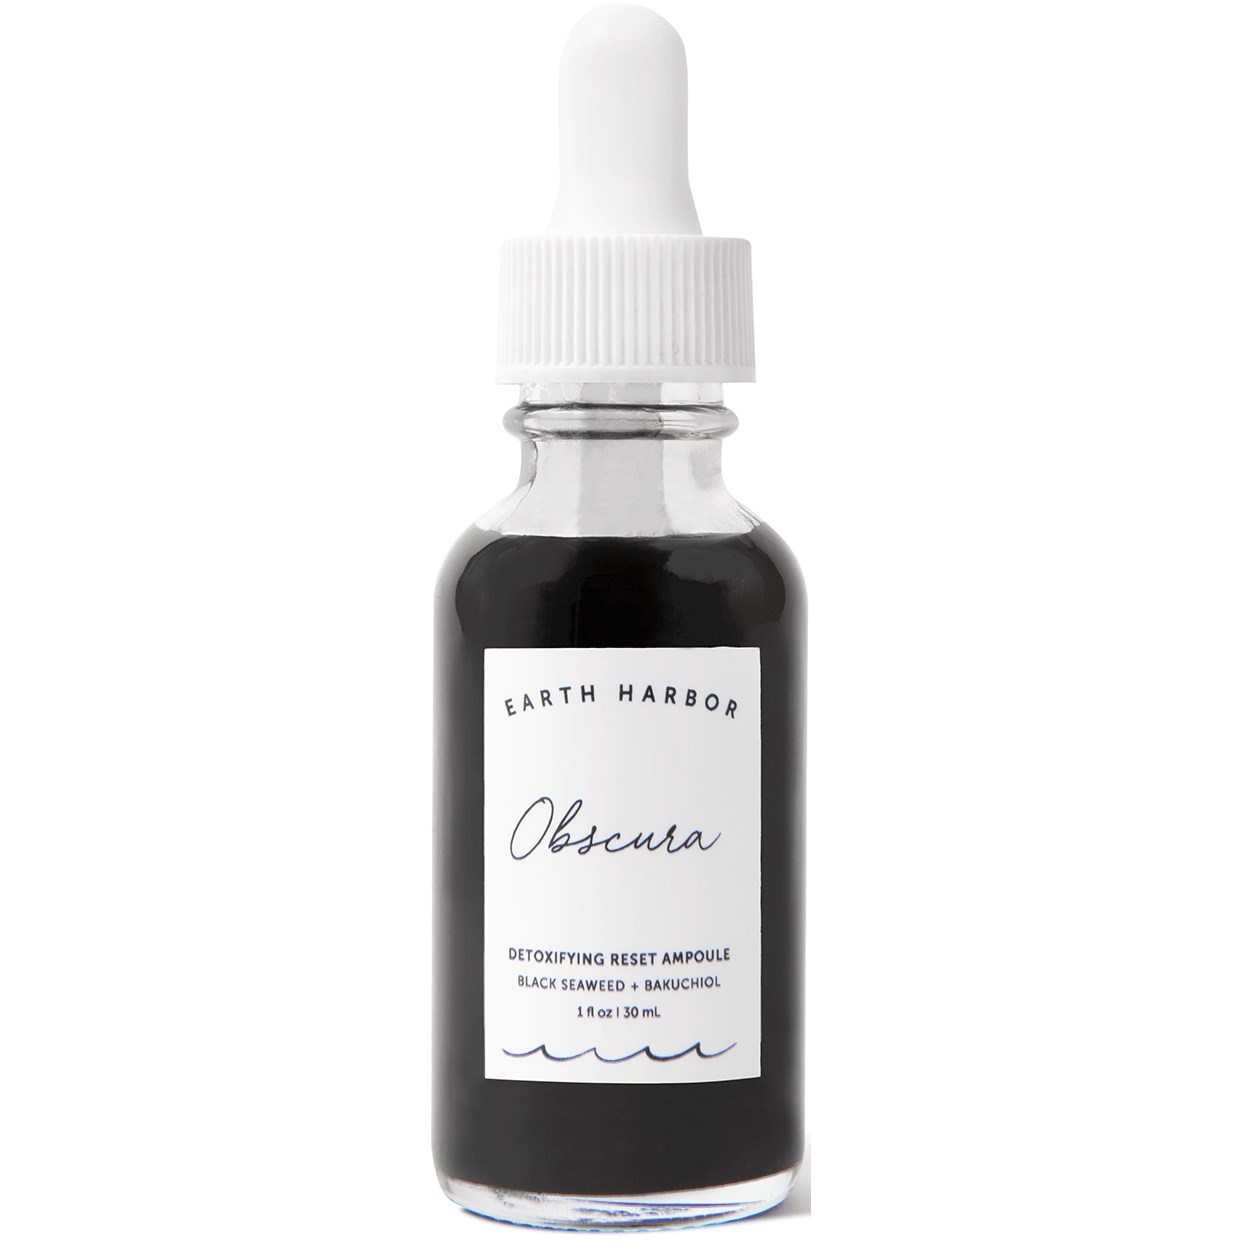 Earth Harbor Obscura Detoxifying Reset Ampoule 30 ml